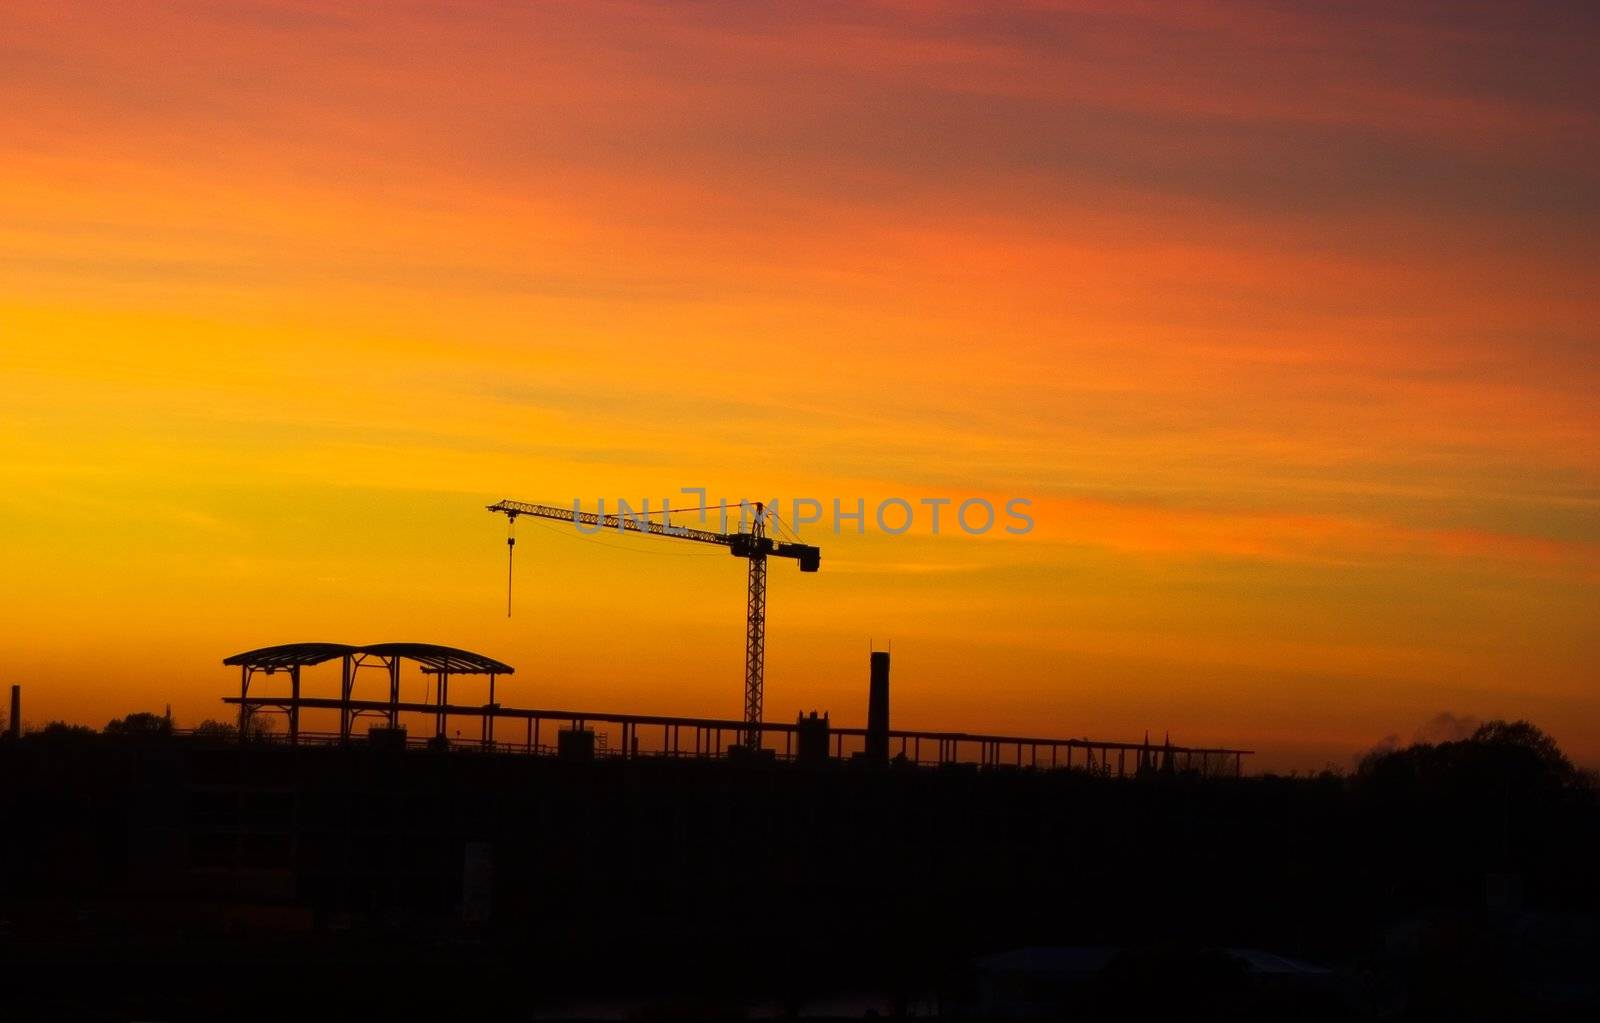 Tower crane in late evening over sunset skies